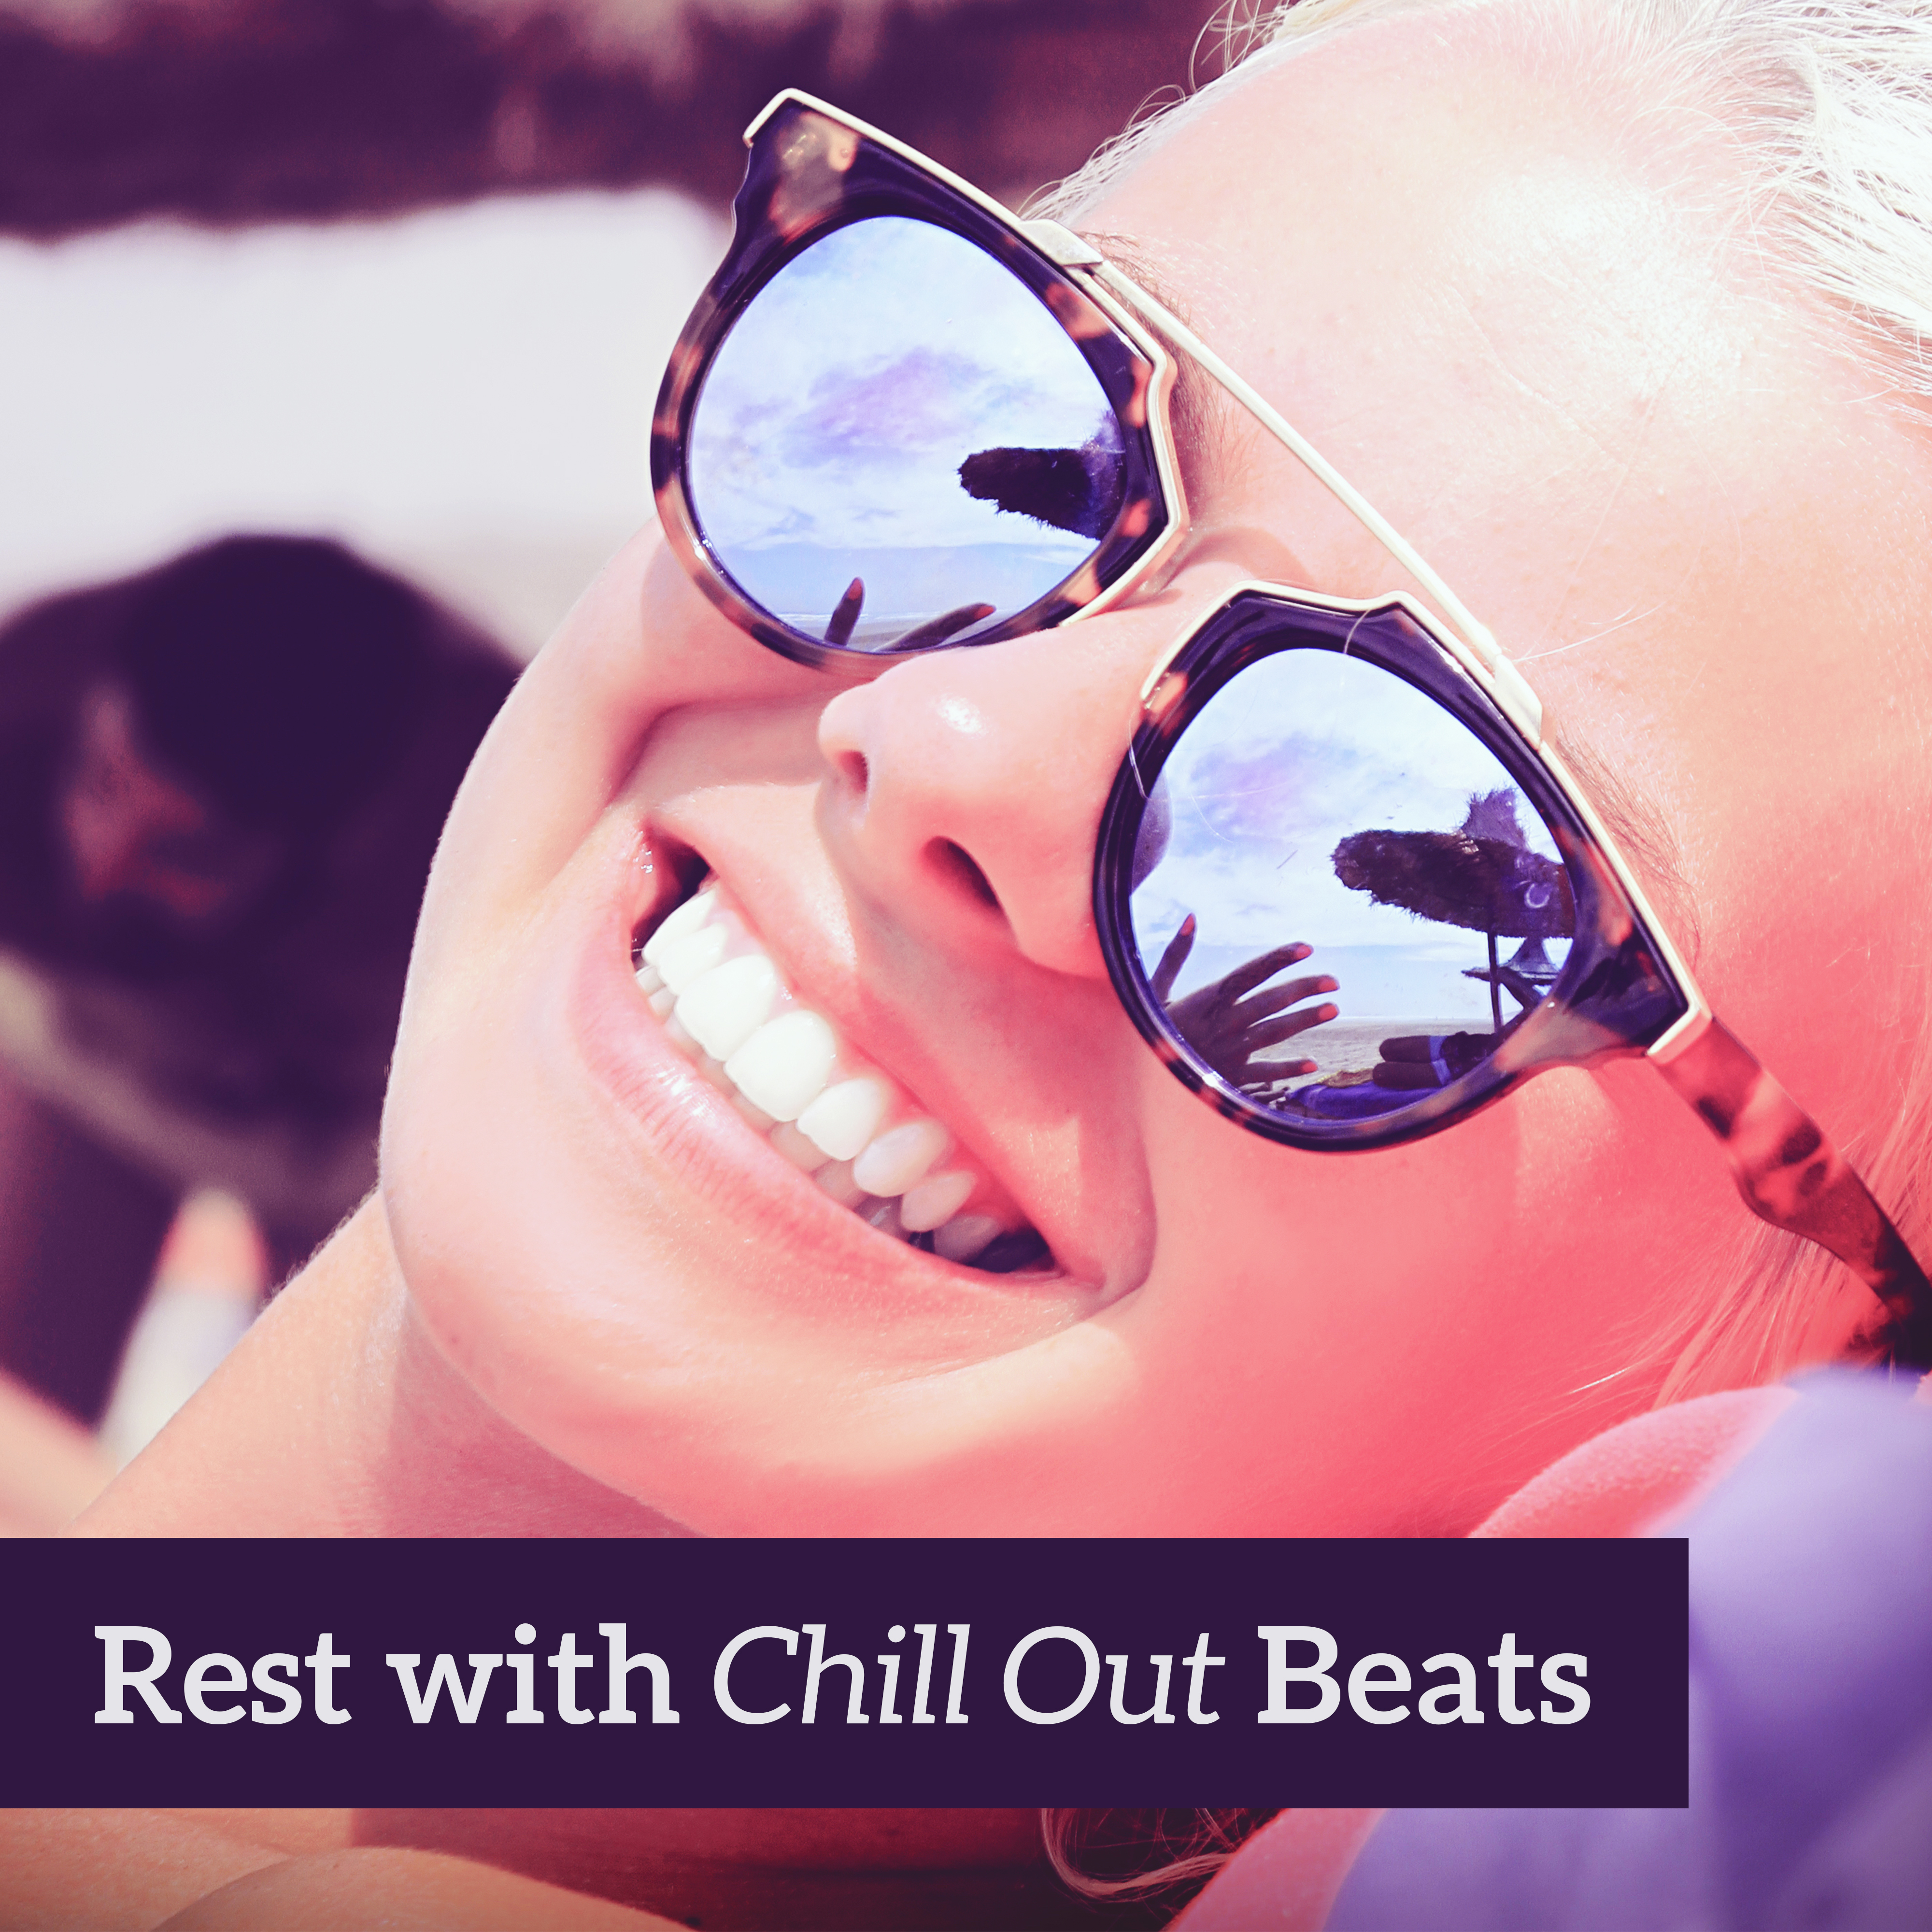 Rest with Chill Out Beats  Soft Songs to Rest, Tropical Island Music, Hot Sun Melodies